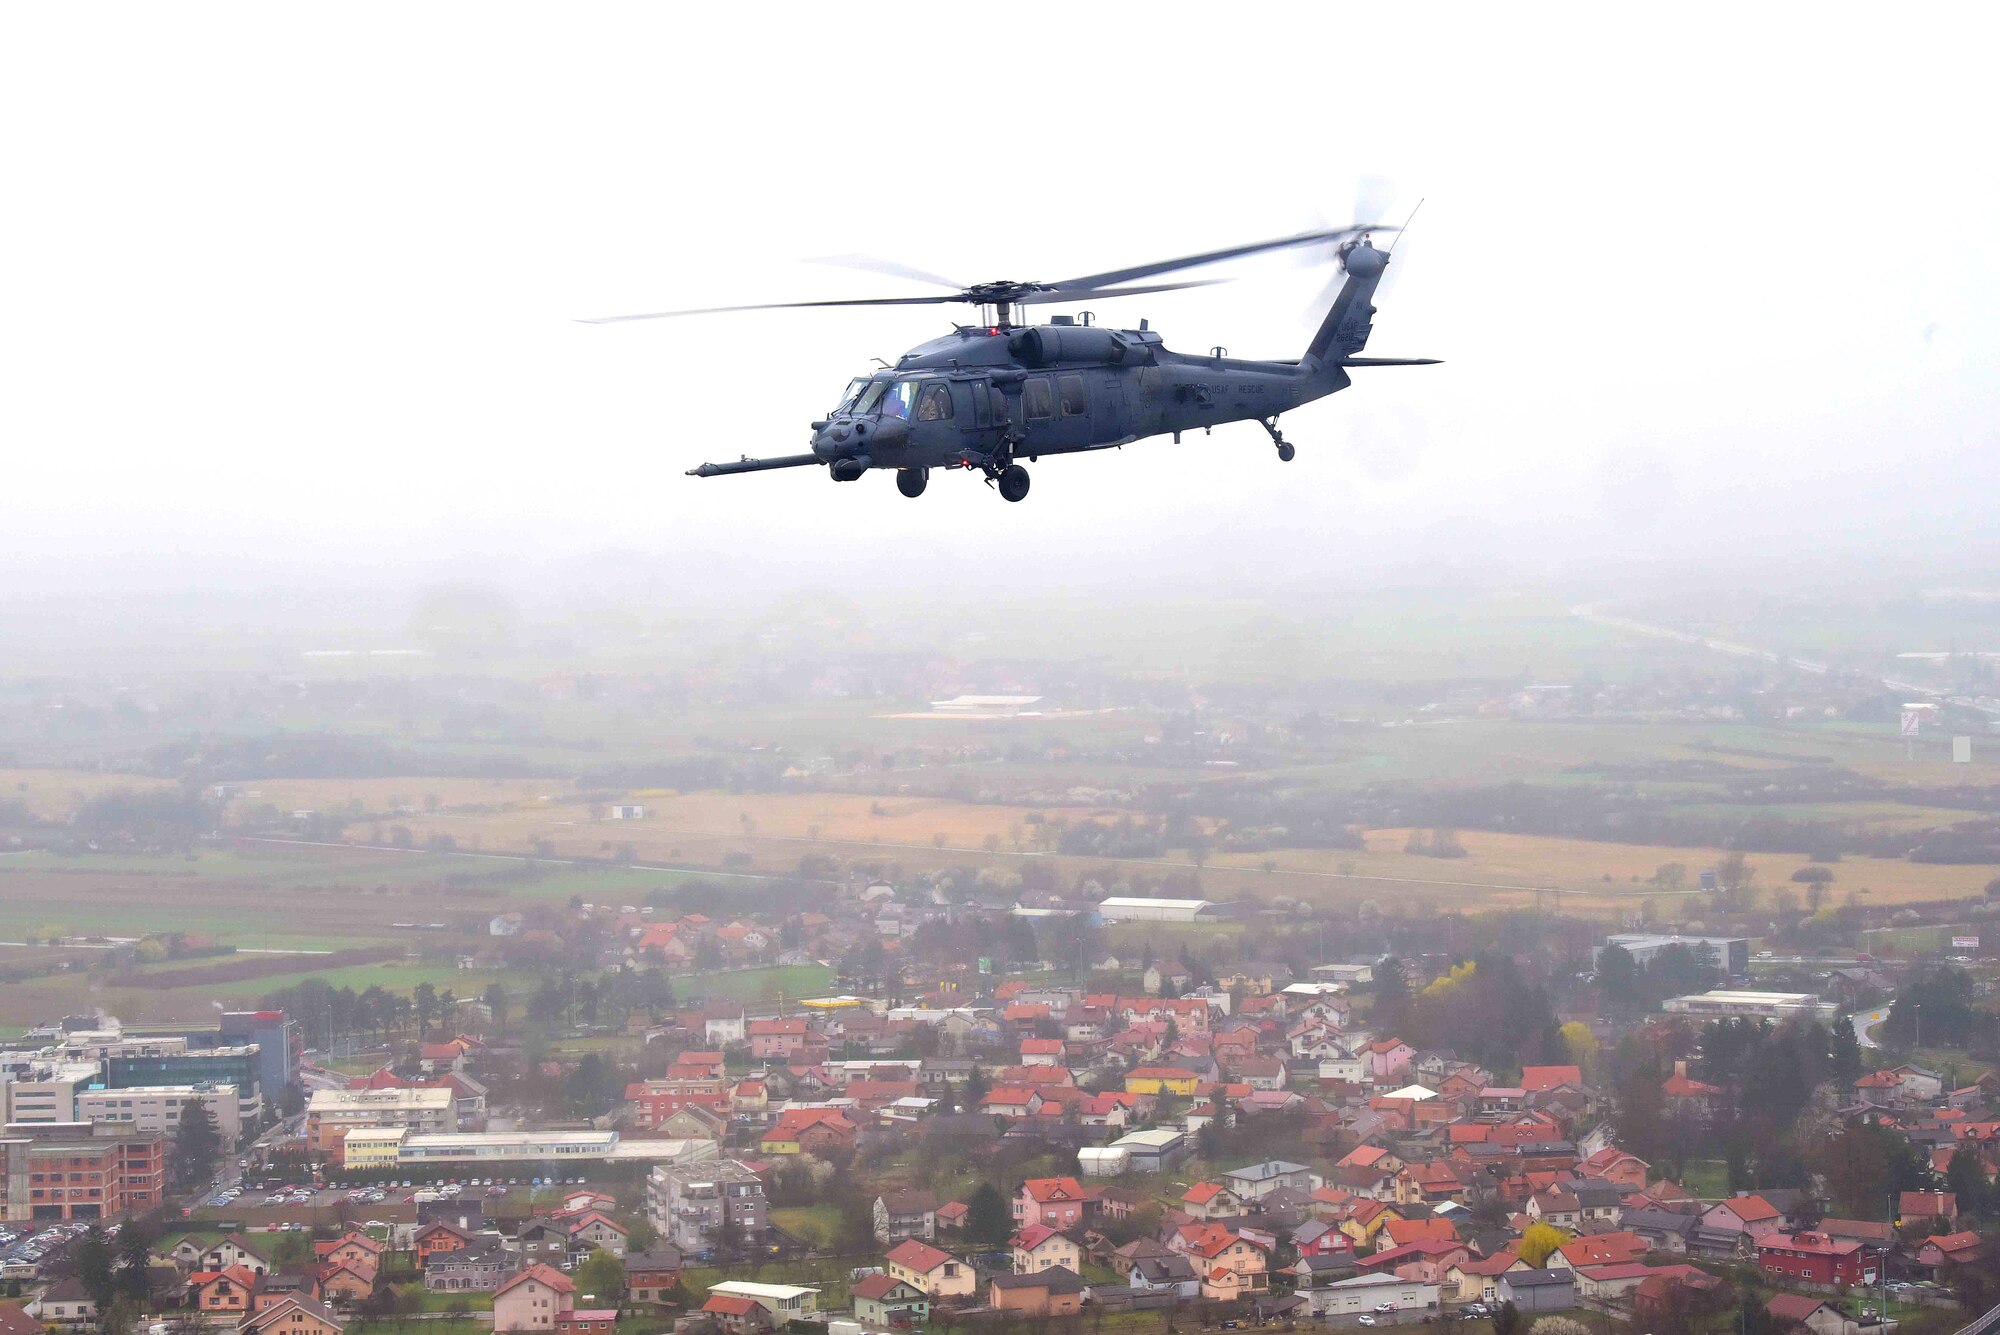 A U.S. Air Force HH-60G Pave Hawk, based out of Aviano Air Base, Italy, transports simulated casualties during a Non-combatant Evacuation Operation exercise near Zagreb, Croatia, March 18, 2019. NEO exercises simulate the ordered or authorized departure of civilians and non-essential military personnel from danger in an overseas country. (U.S. Air Force photo by Senior Airman Kevin Sommer Giron)